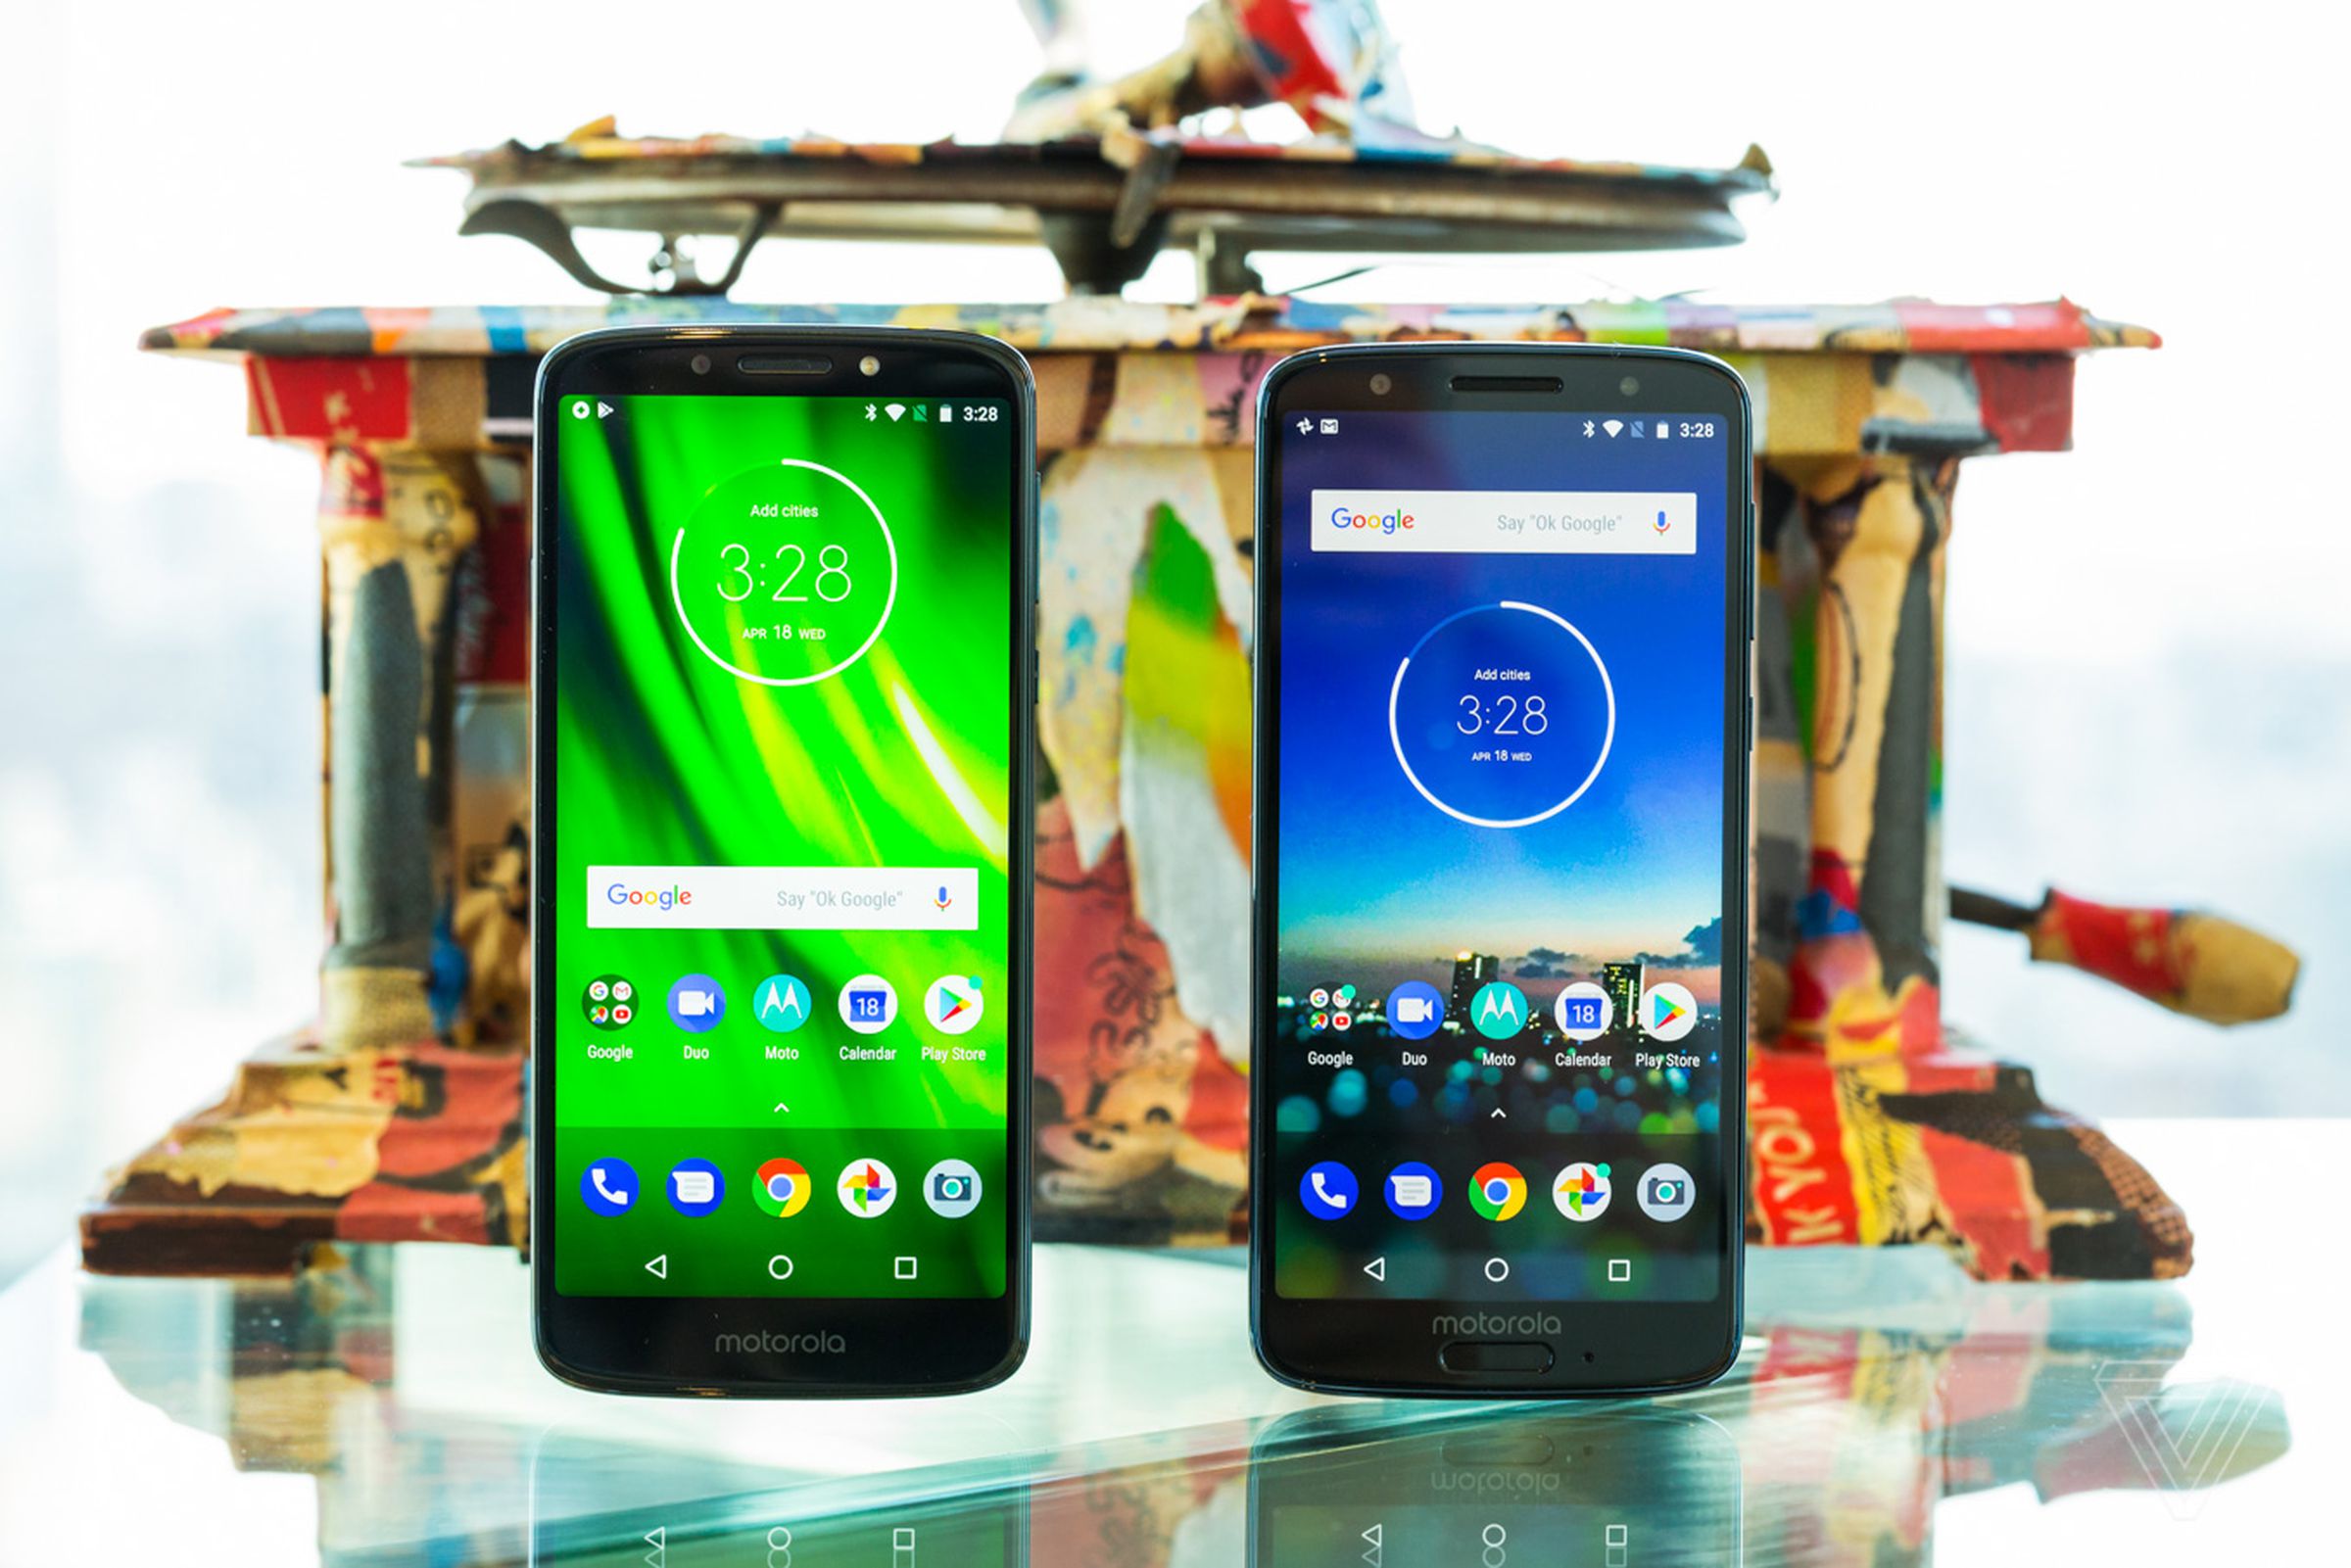 Moto G6 Play (left) and Moto G6 (right)